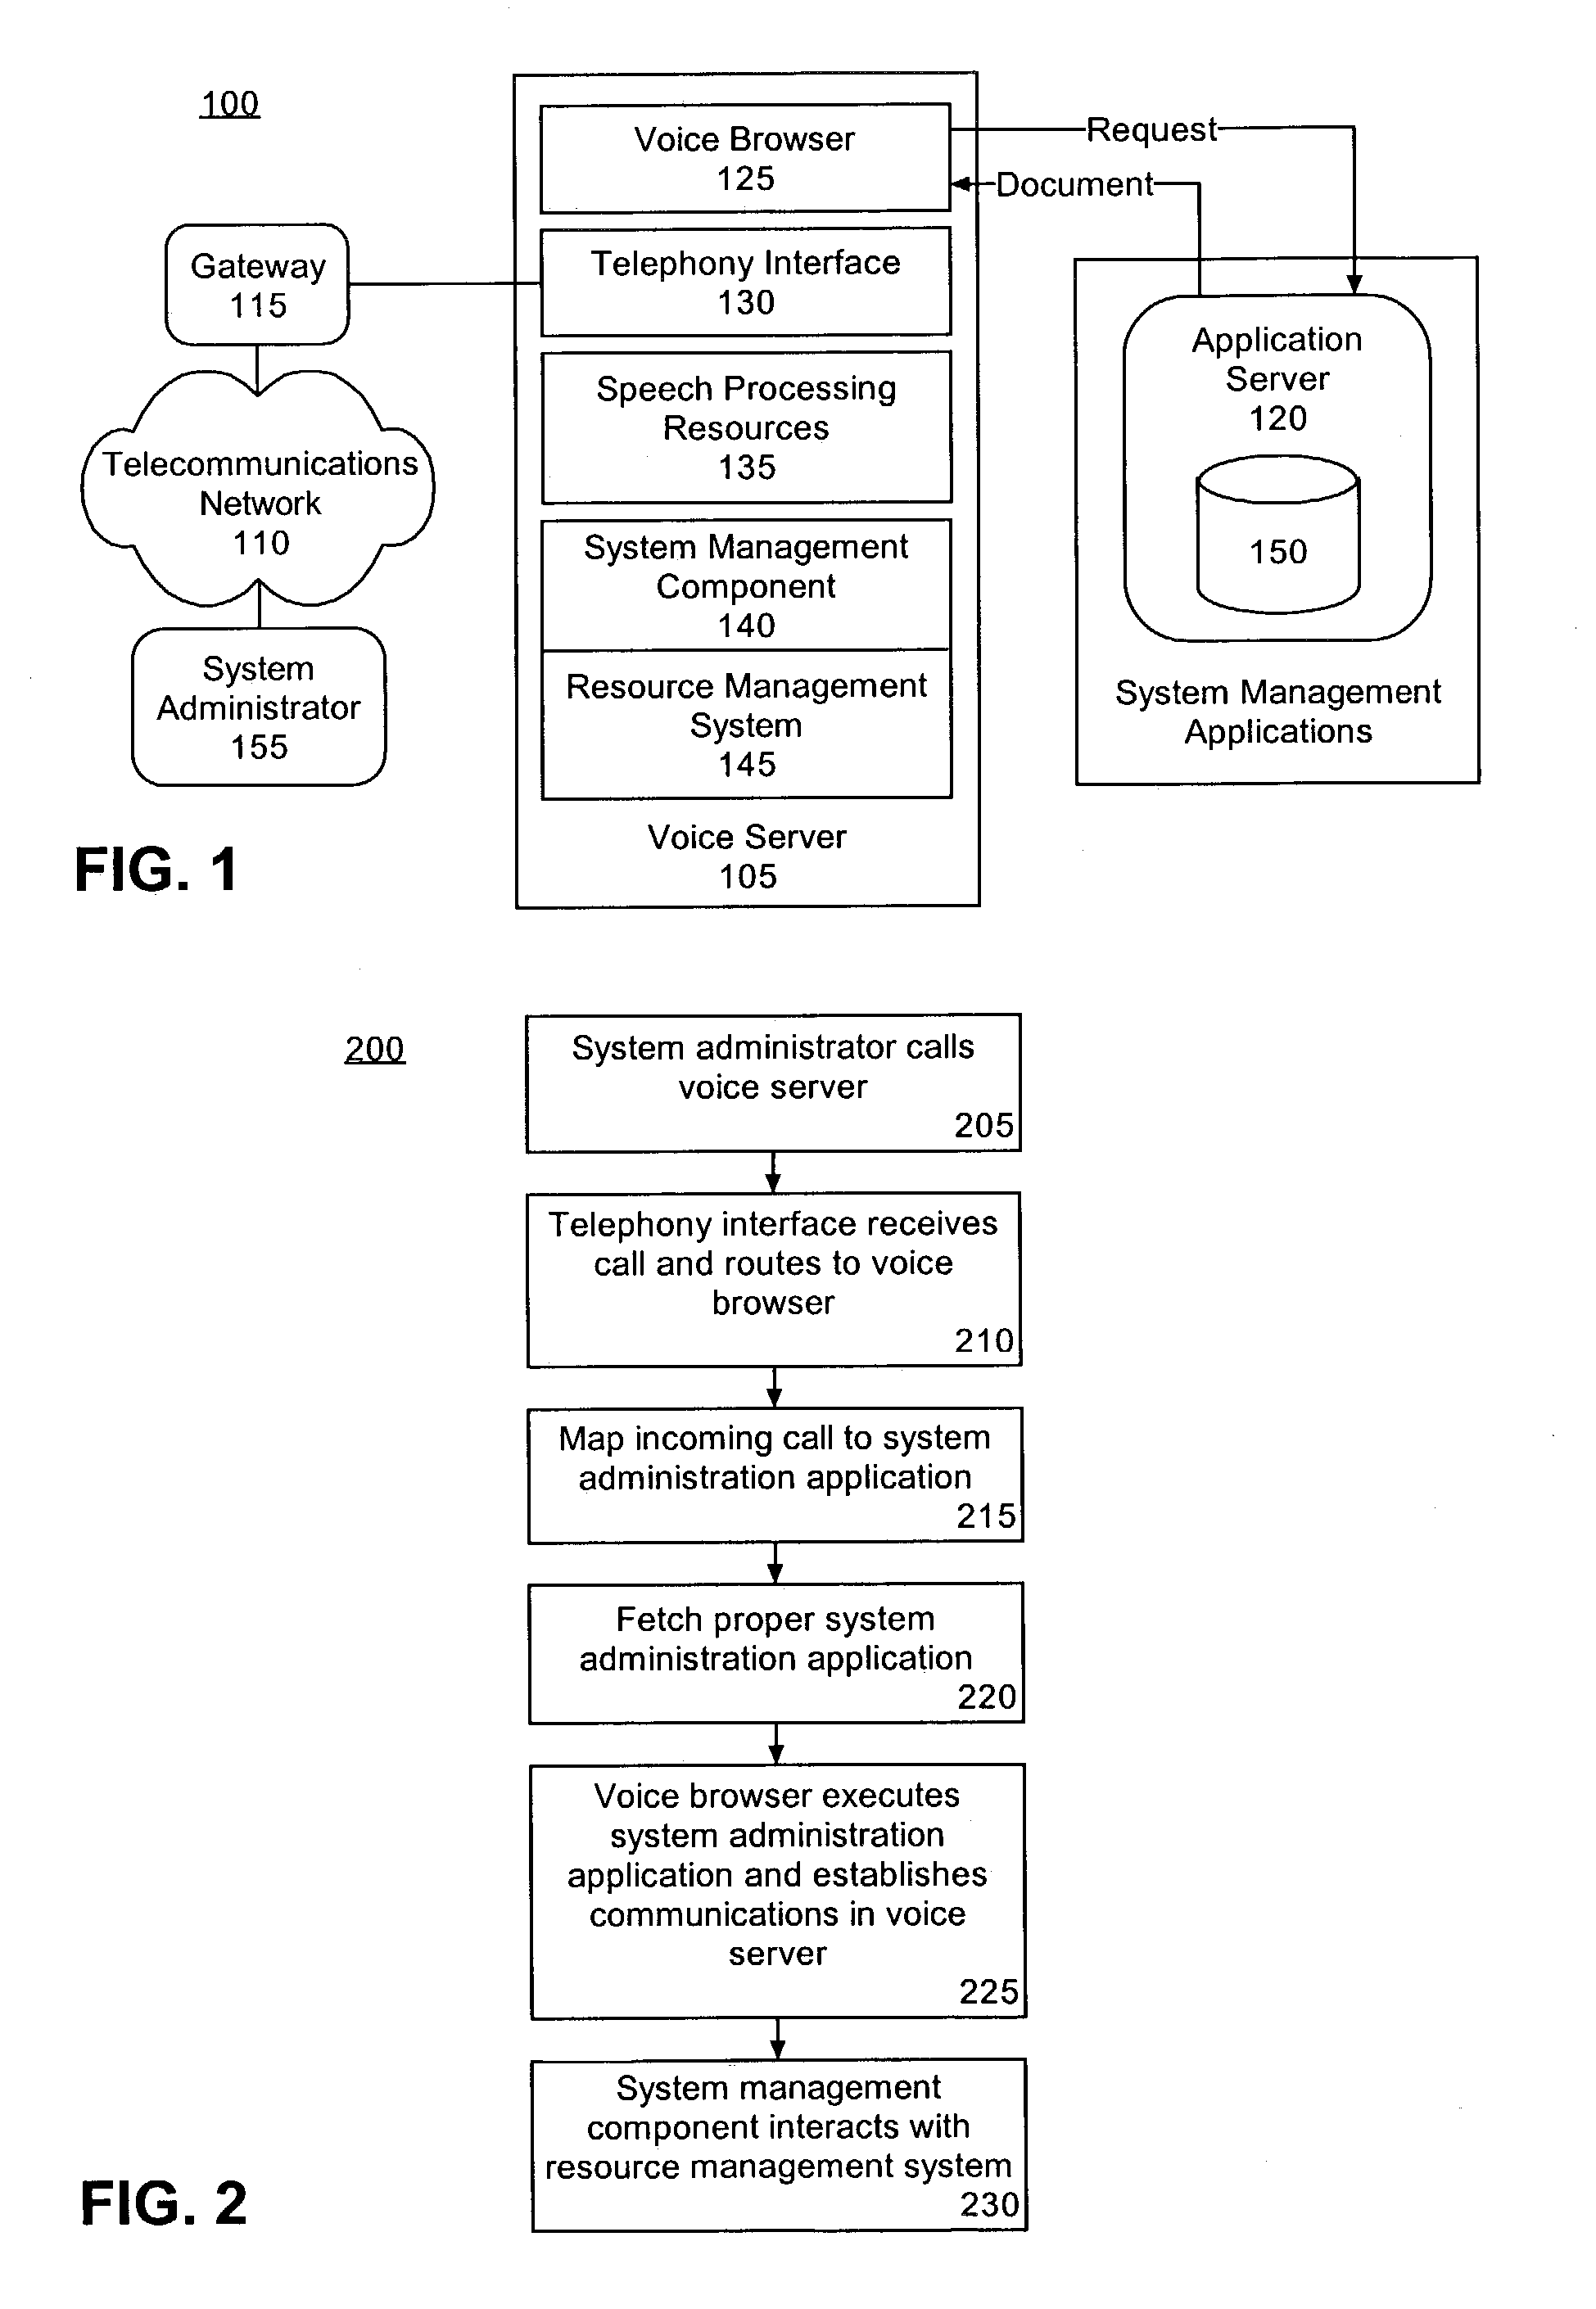 Telephony and voice interface for voice server system management